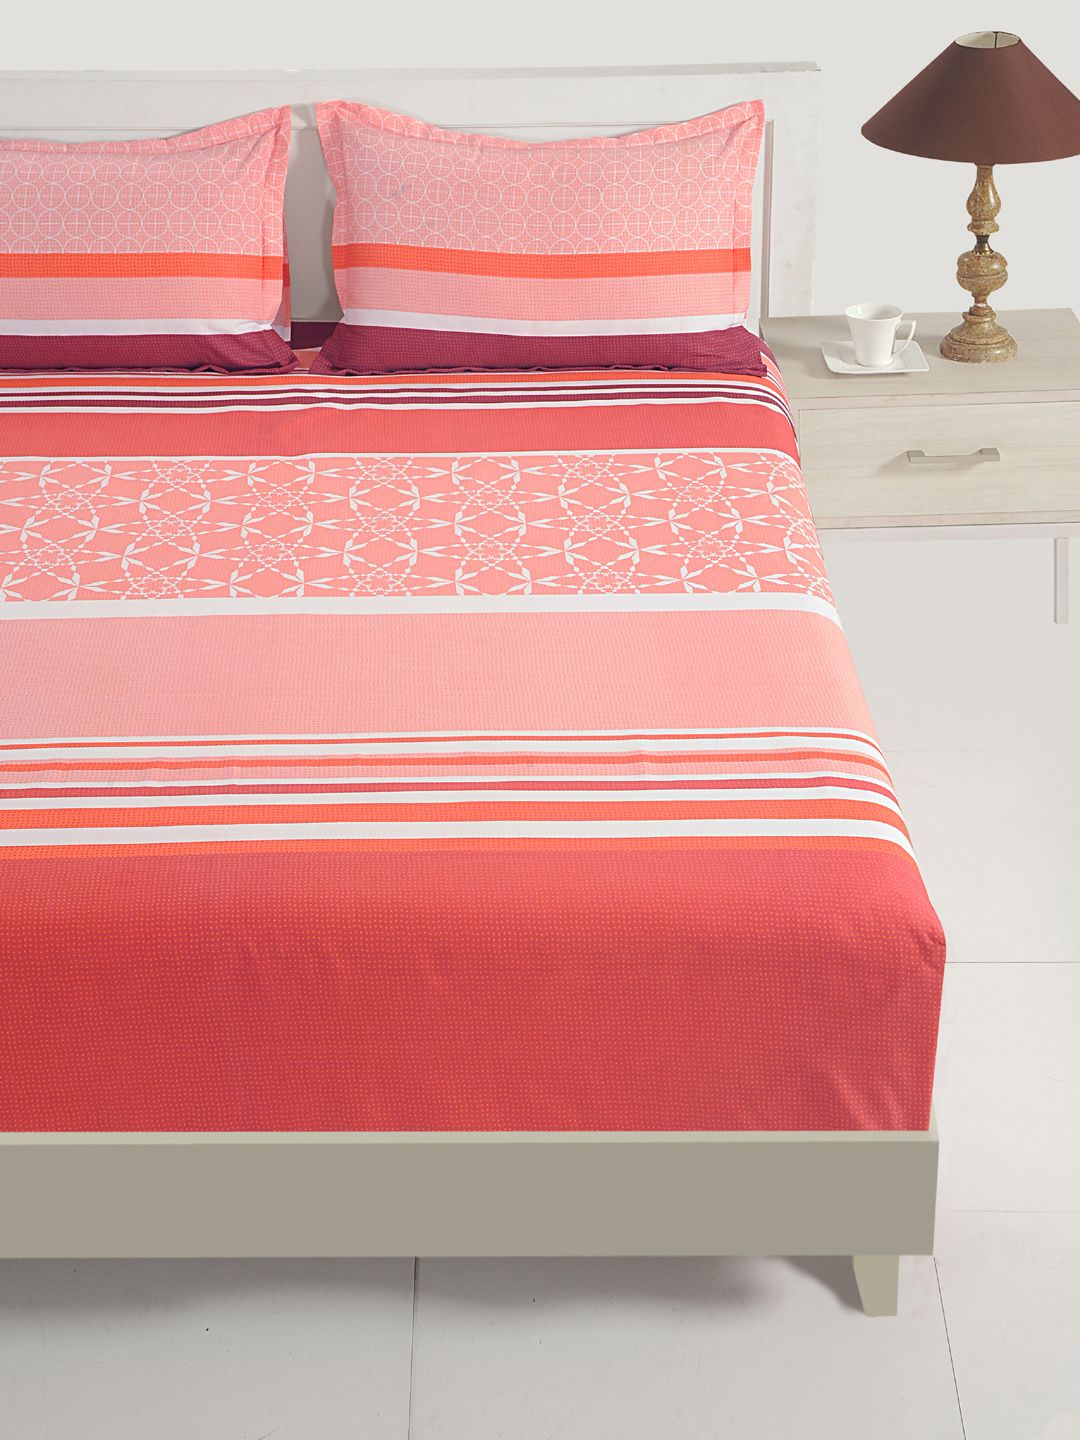 SWAYAM Coral Striped Flat 144 TC Cotton 1 Extra Large Bedsheet with 2 Pillow Covers Price in India